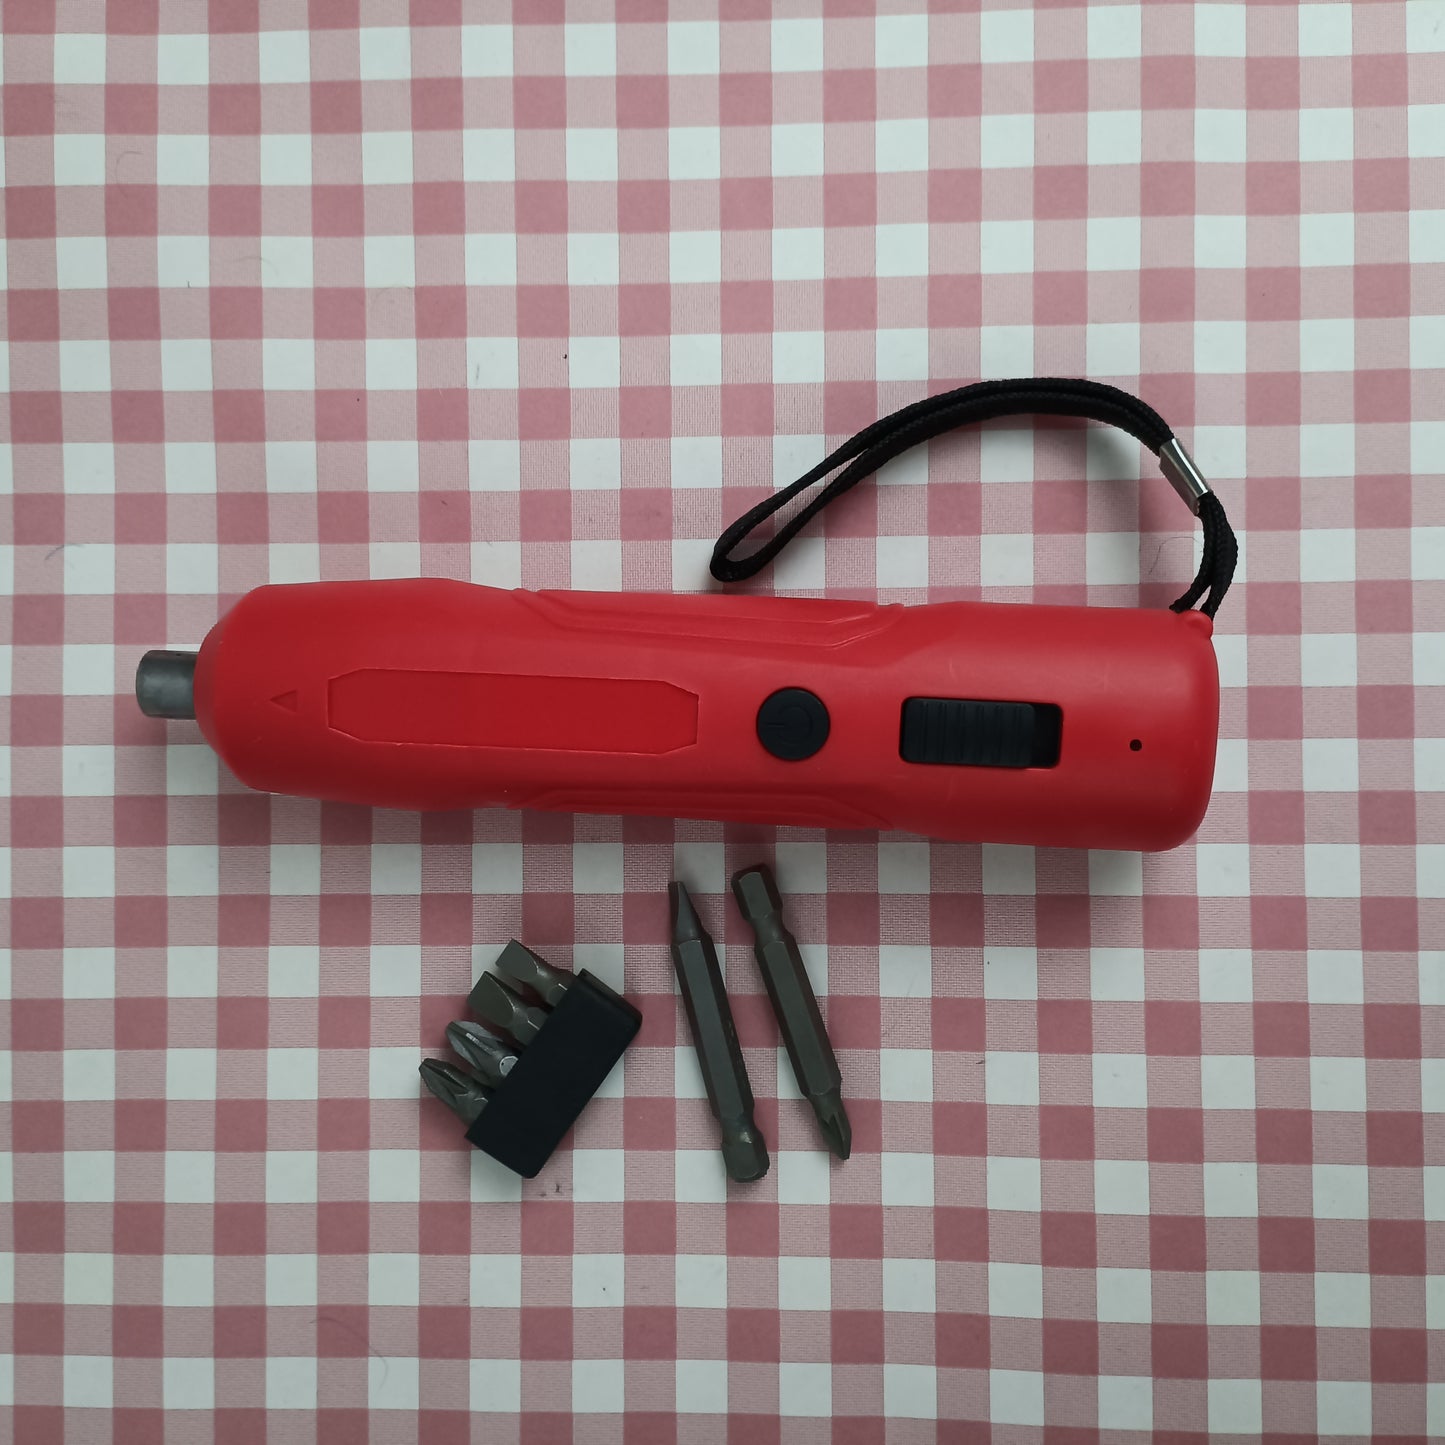 MHPRO Electric screwdrivers rechargeable multifunctional household small screwdriver mini electric screwdriver gun lithium electric hand drill tools